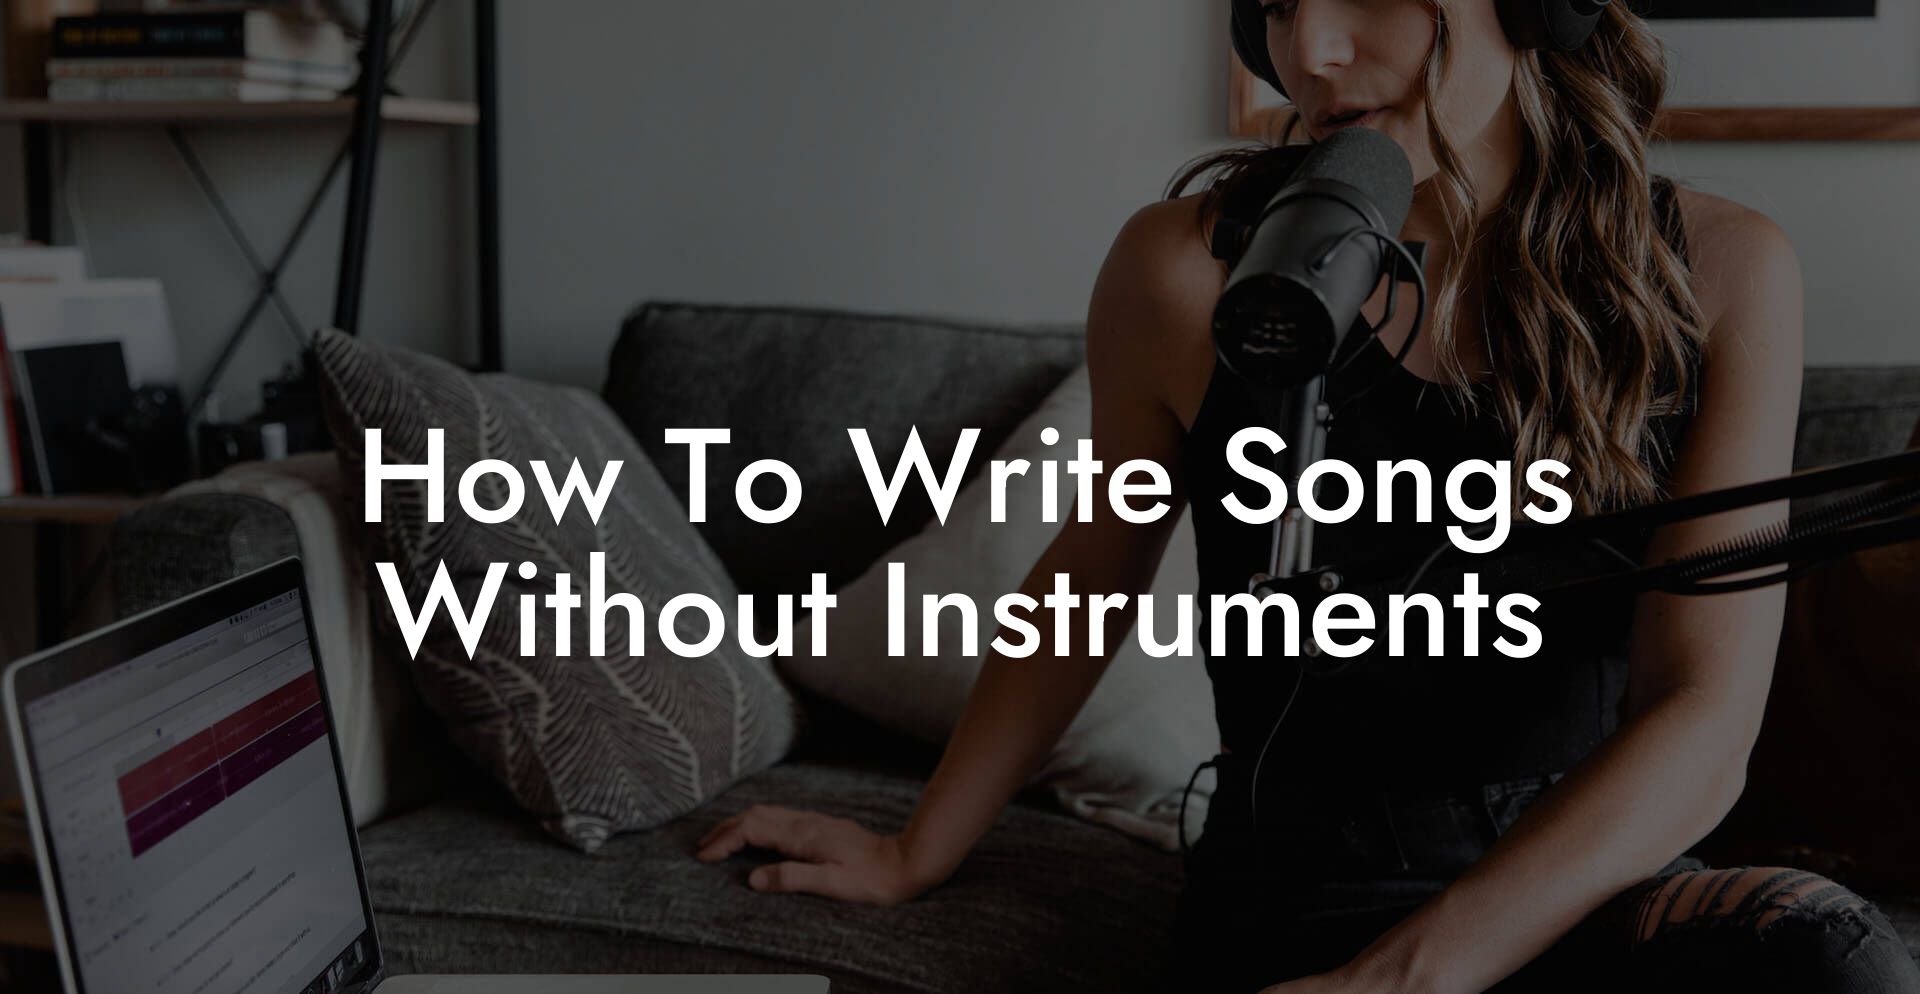 how to write songs without instruments lyric assistant